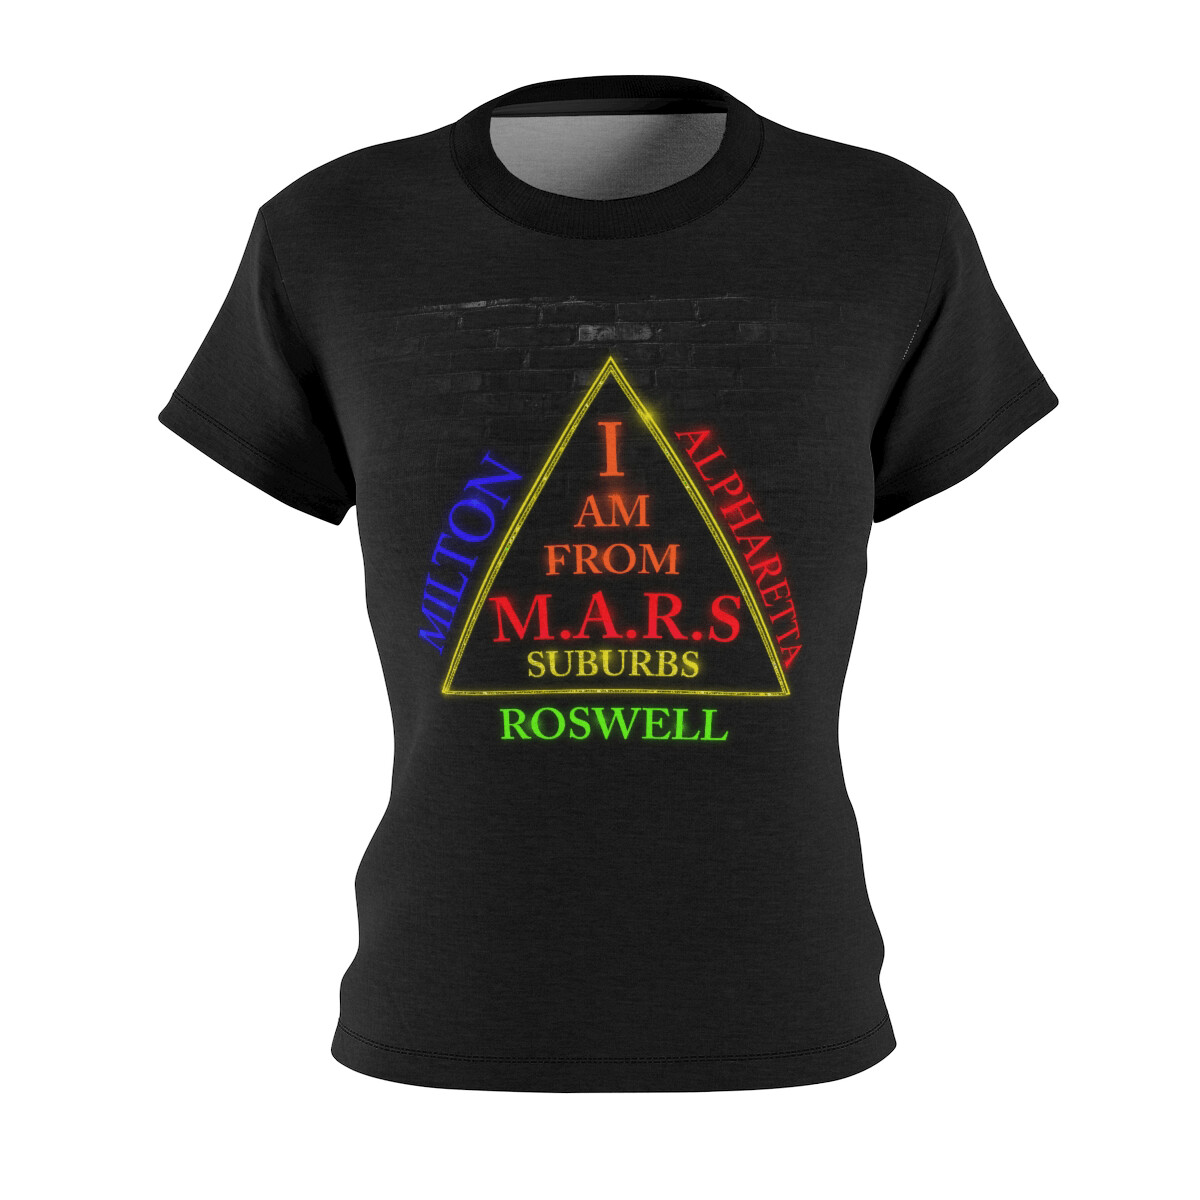 Unisex I am from M.A.R.S. Crewneck T-Shirt 2